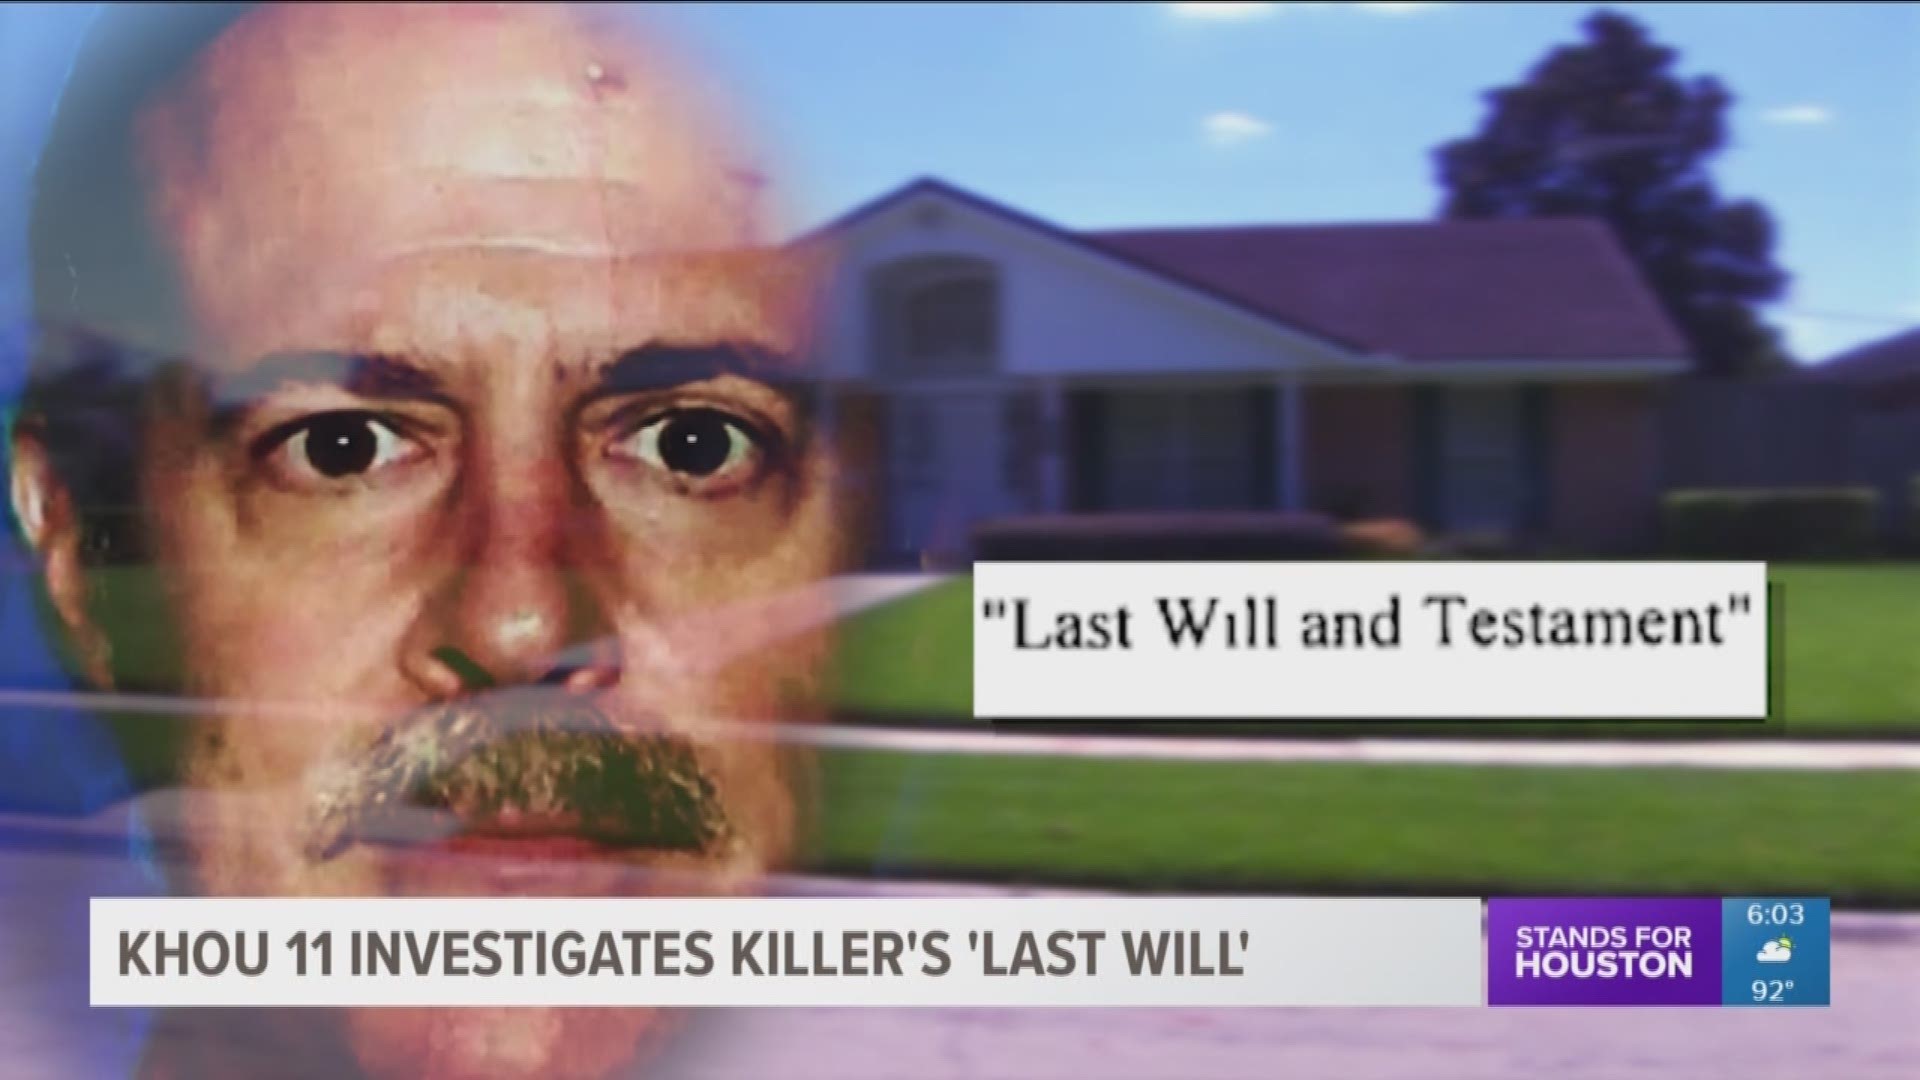 Records show that Joseph Pappas was getting his final affairs in order days after the murder of prominent Houston cardiologist Dr. Mark Hausknecht.